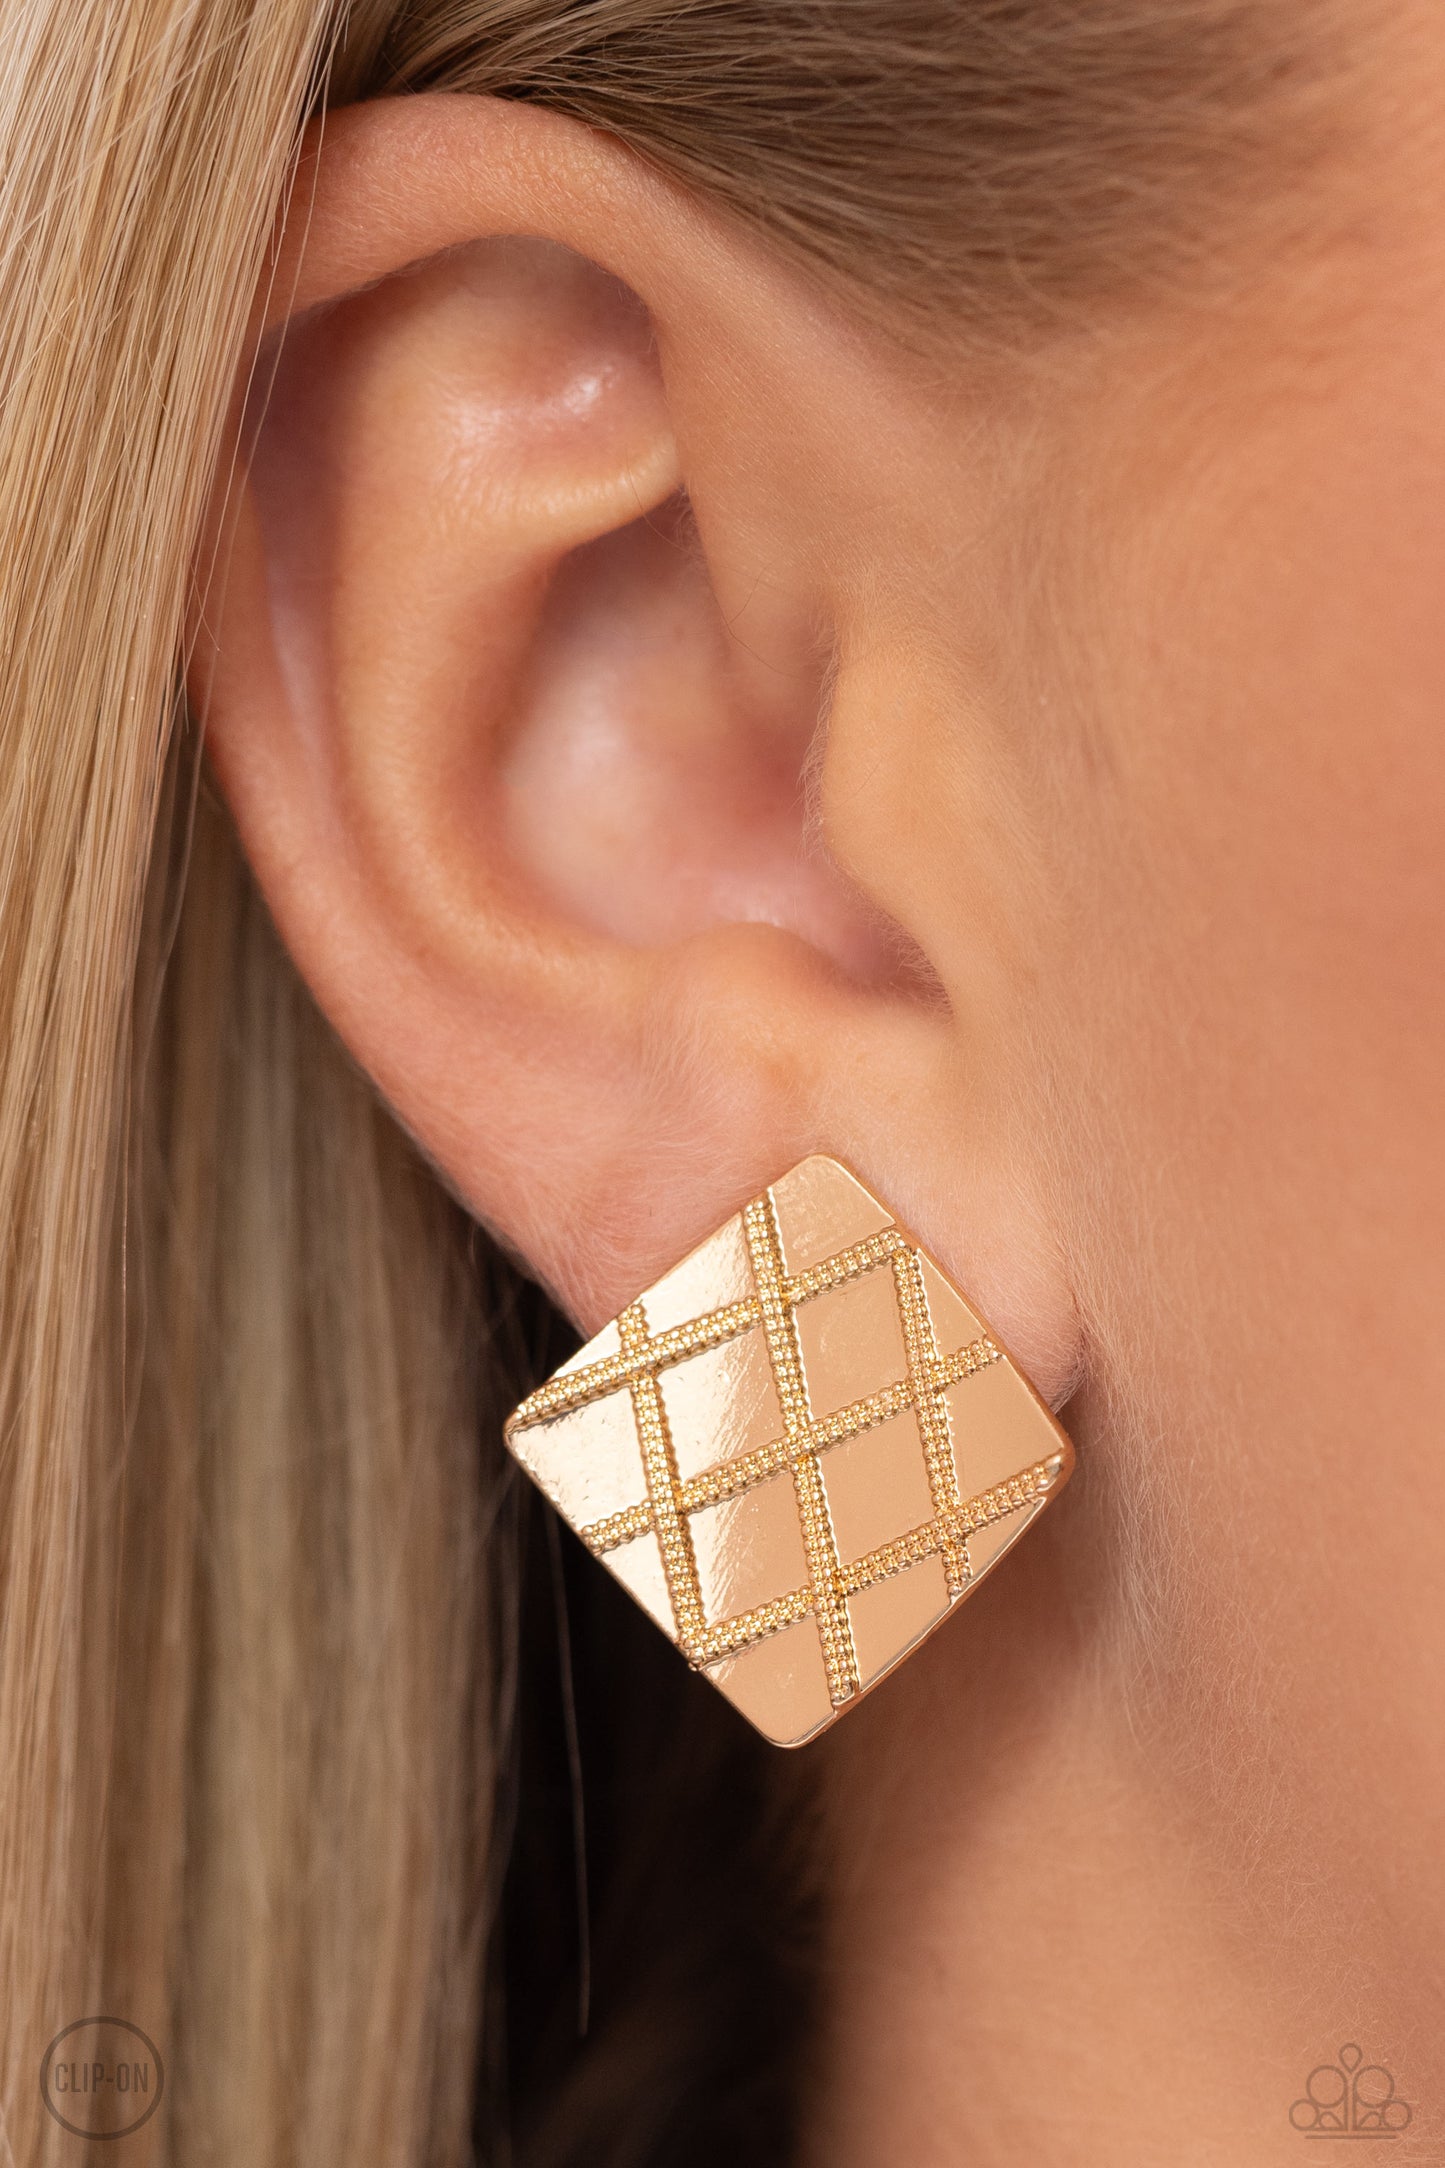 Paparazzi Accessories - Plaid and Simple - Gold Clip-On Earrings a curving gold square is embossed in a slanted plaid-like pattern, creating a tactile frame. Earring attaches to a standard clip-on fitting.  Sold as one pair of clip-on earrings.